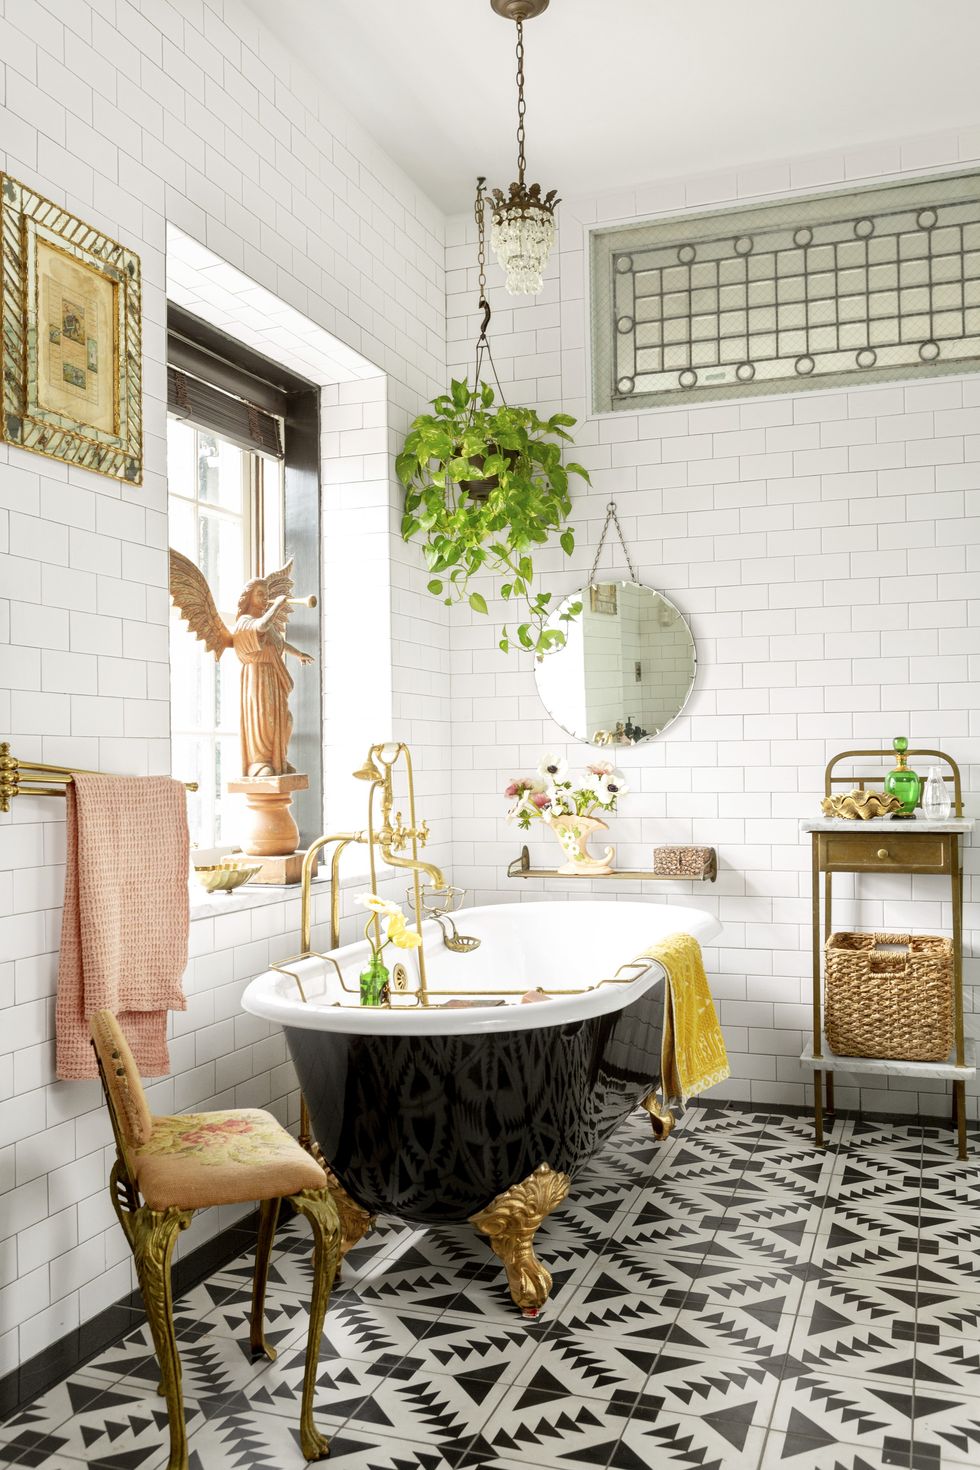 bathroom with wildly patterned tile on the floor